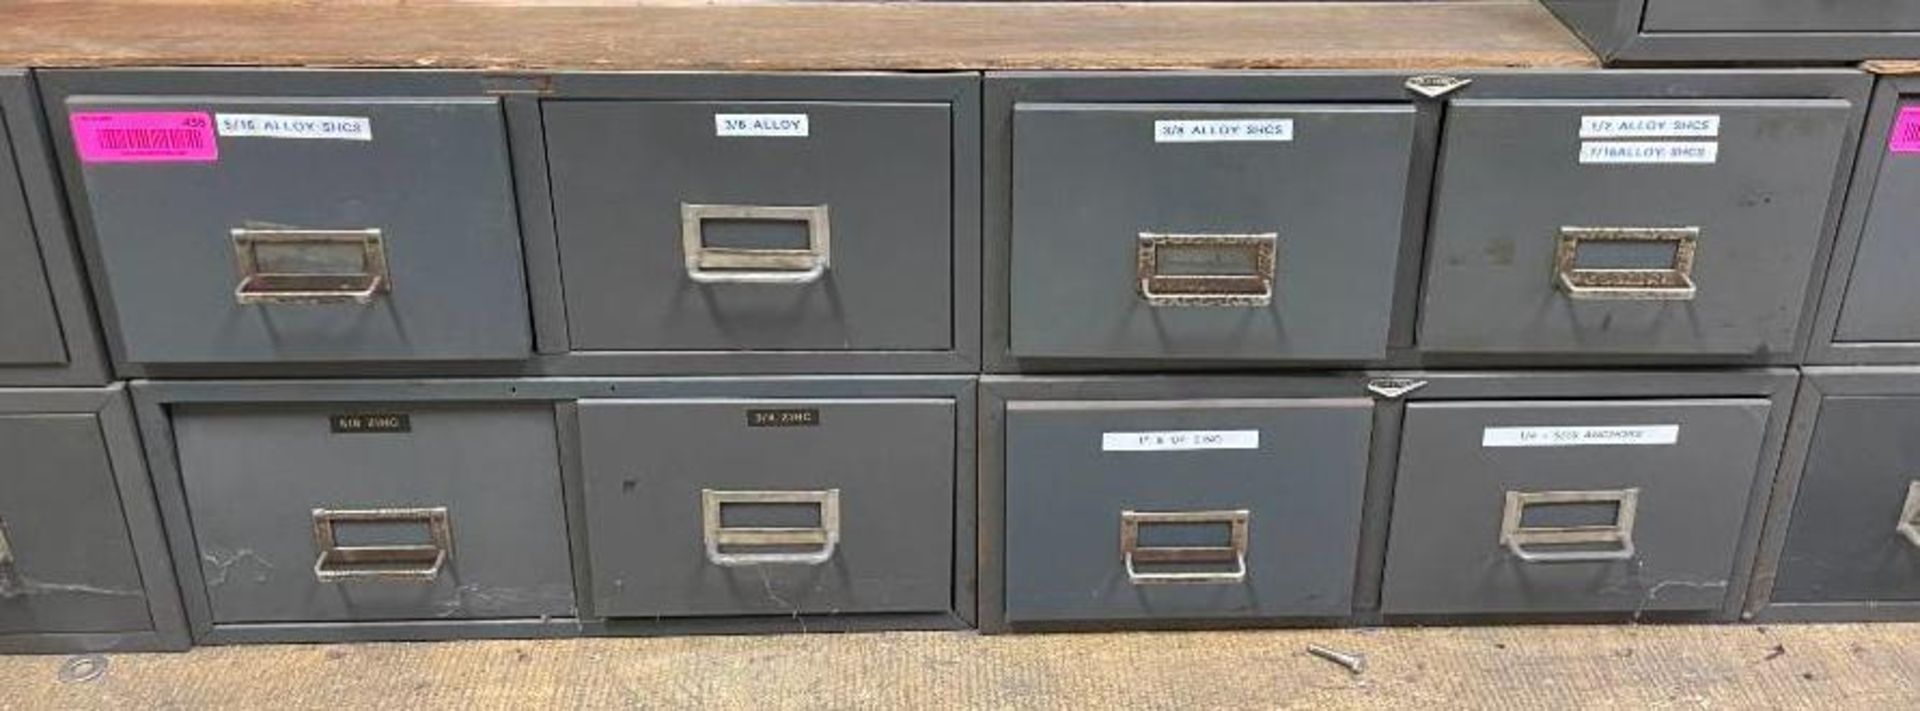 (4) 2-DRAWER HARDWARE BINS WITH CONTENTS INFORMATION: 5/16 ALLOY SHCS, 3/8 ALLOY, 3/8 ALLOY SHCS, 1/